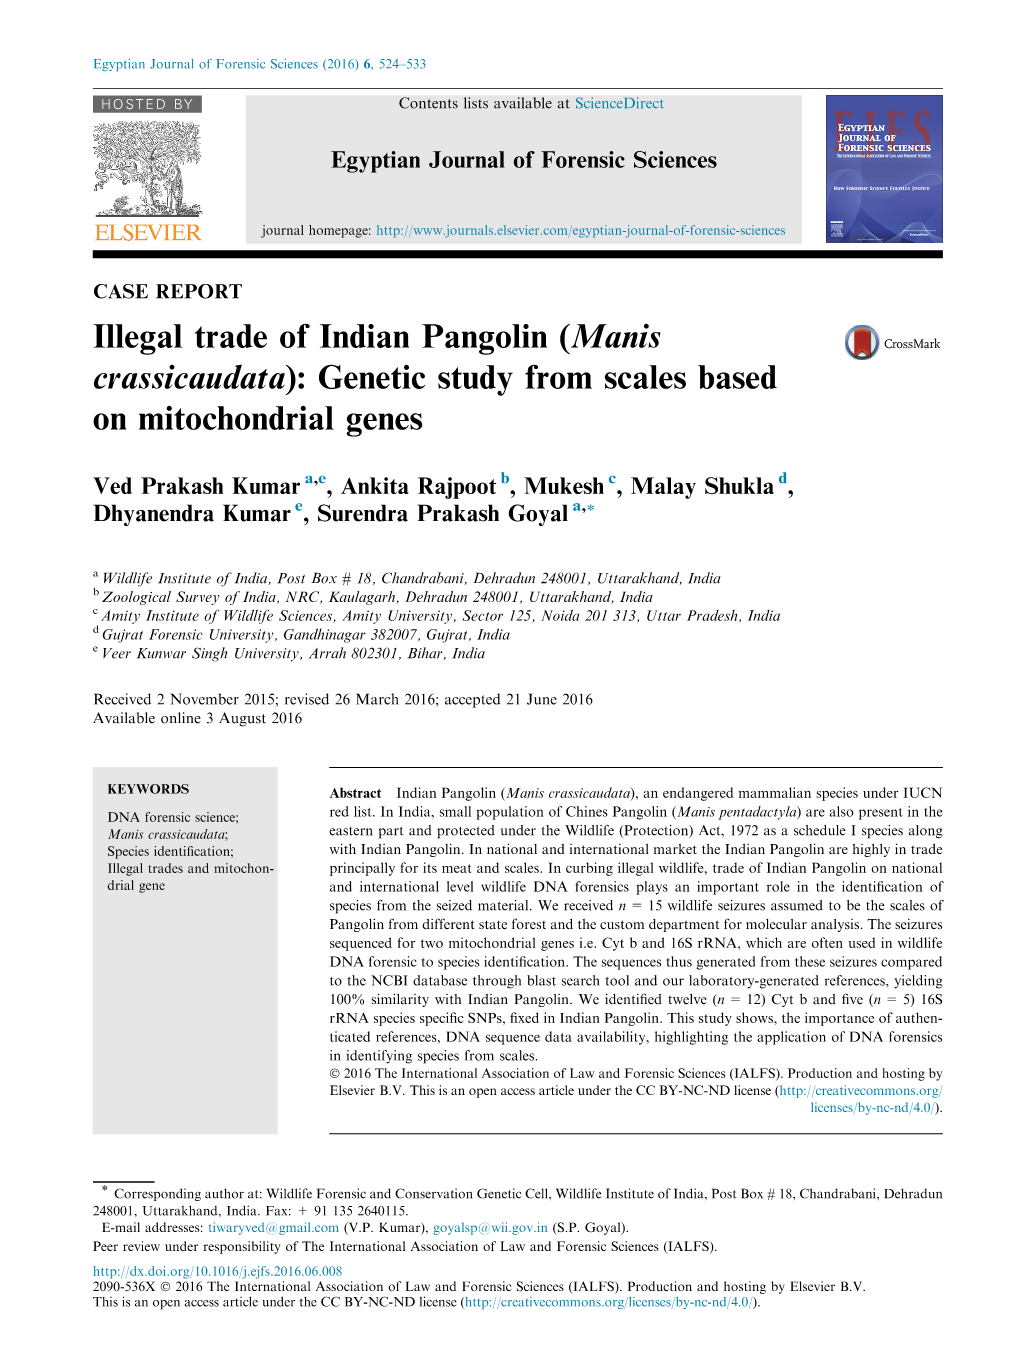 Illegal Trade of Indian Pangolin (Manis Crassicaudata): Genetic Study from Scales Based on Mitochondrial Genes